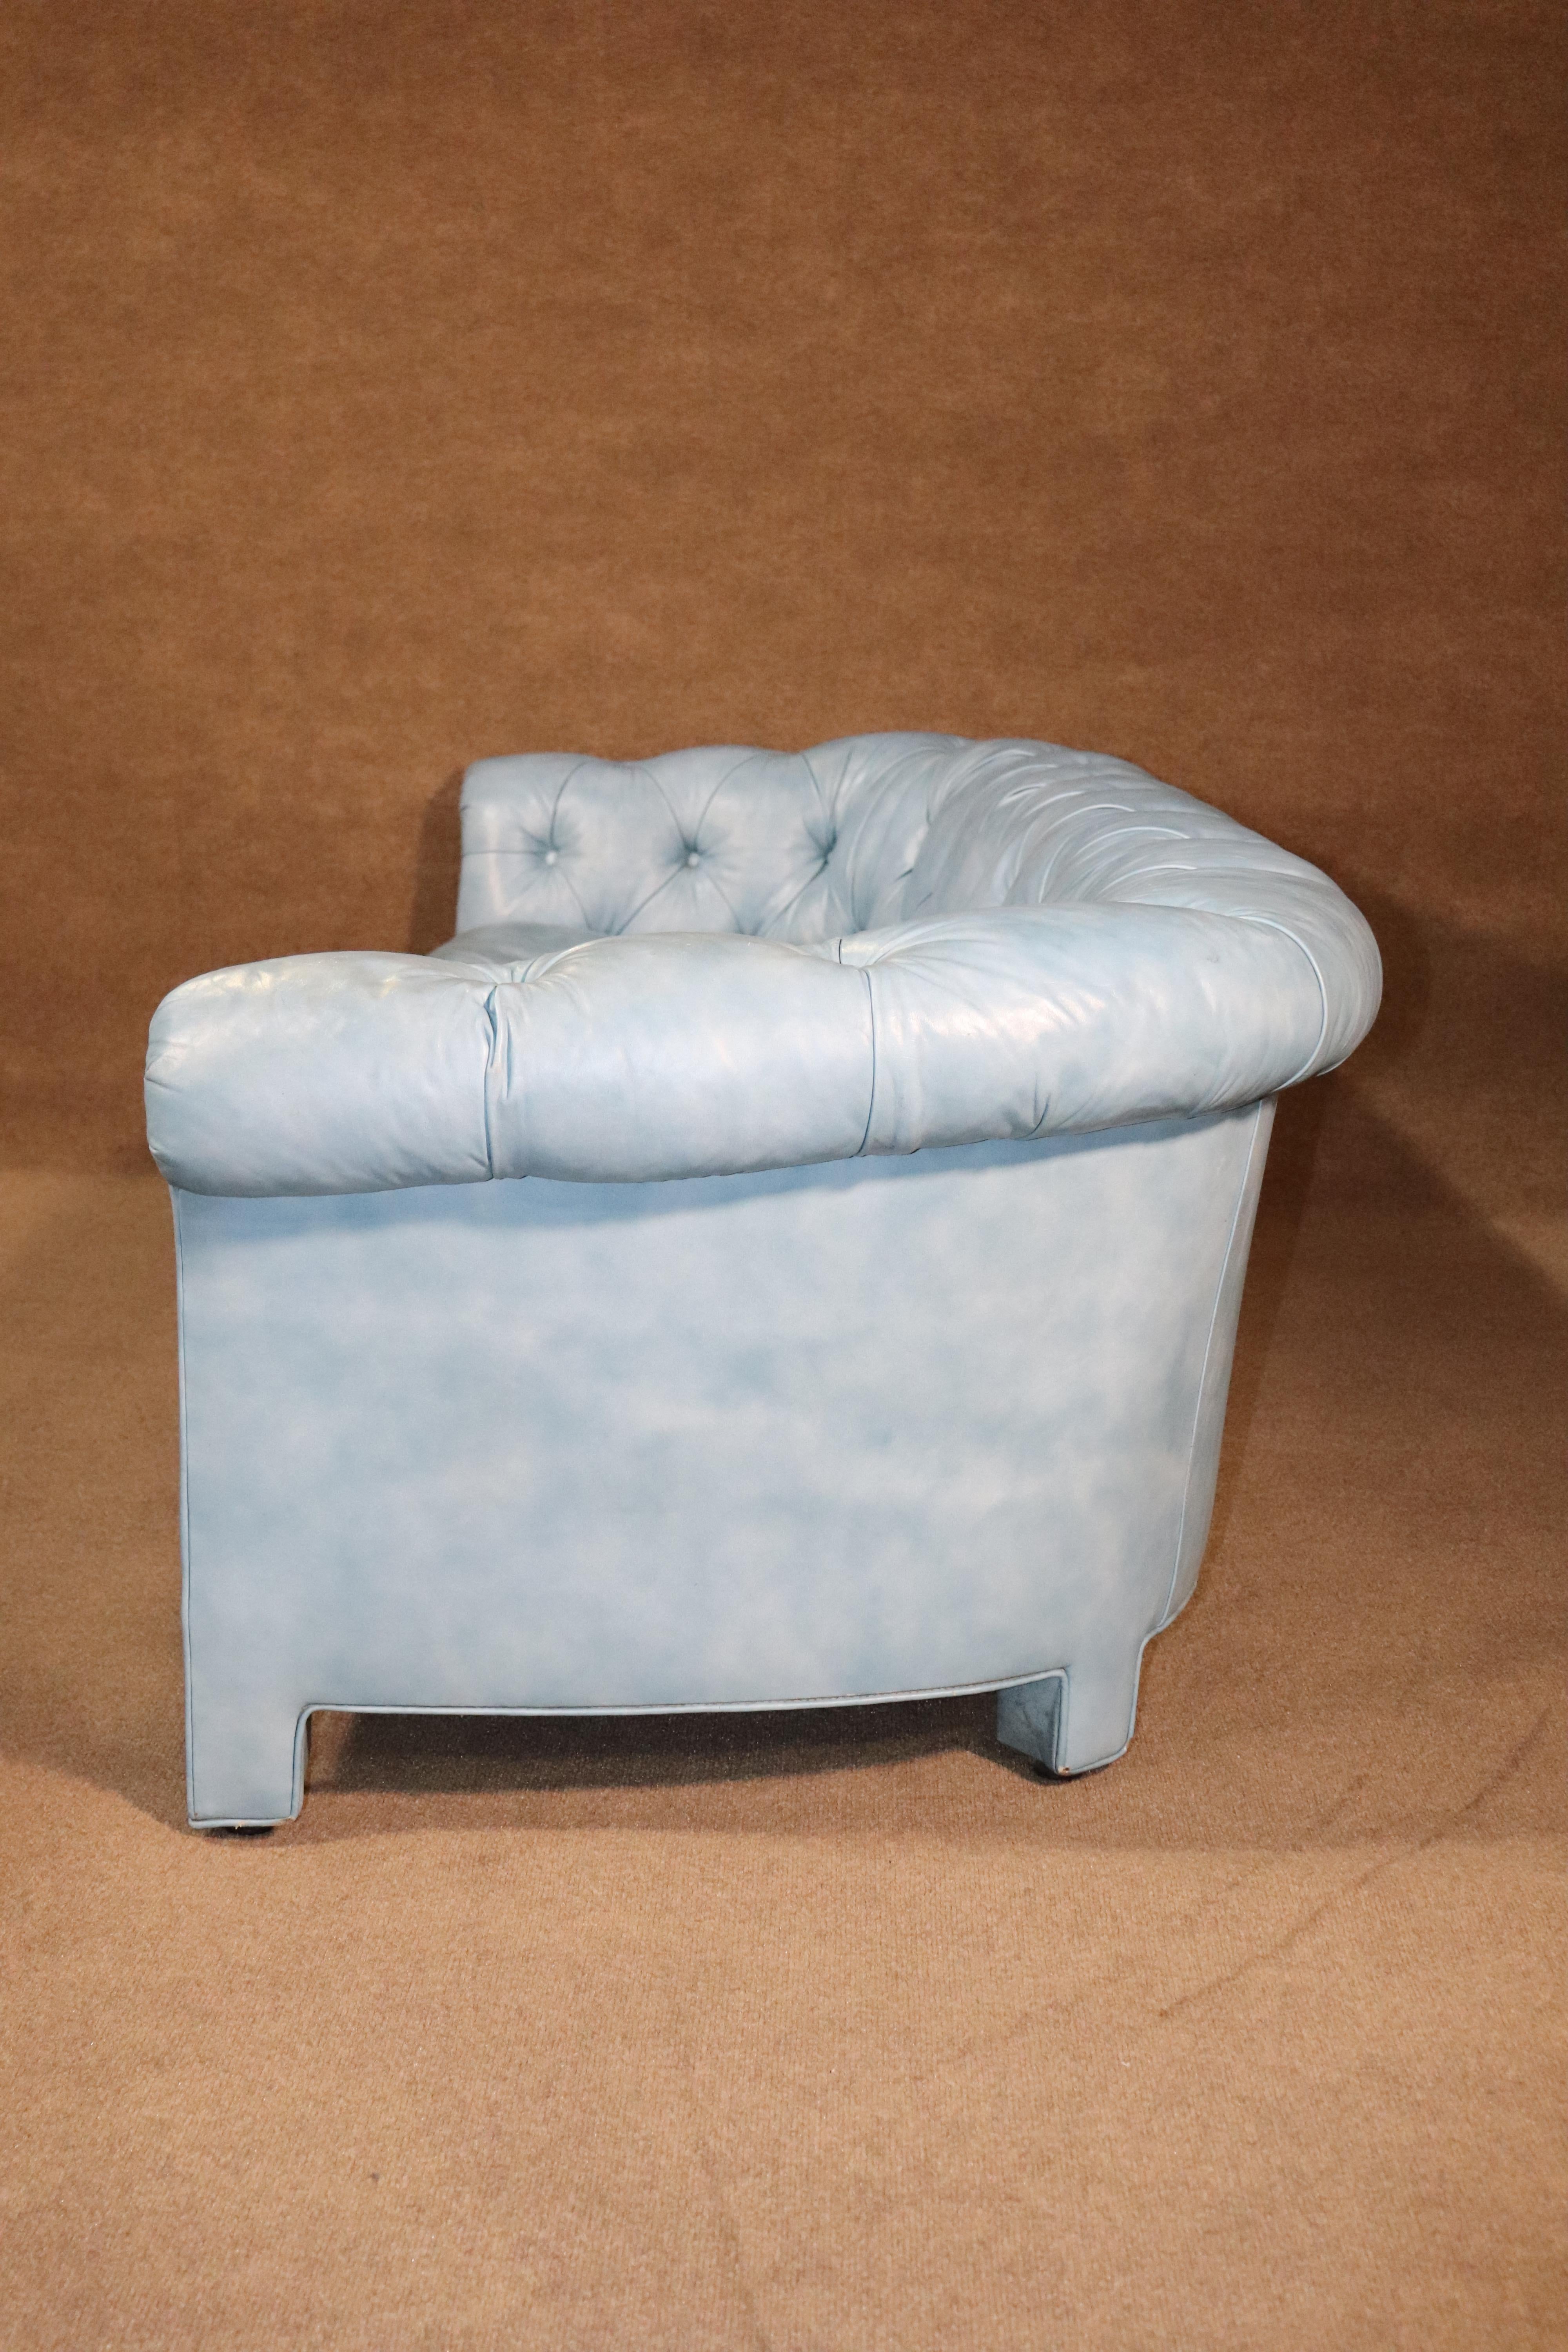 Long chesterfield sofa in blue fabric with tufted seating. Beautiful soft blue coloring adds a pop to this classic style.
Please confirm location.